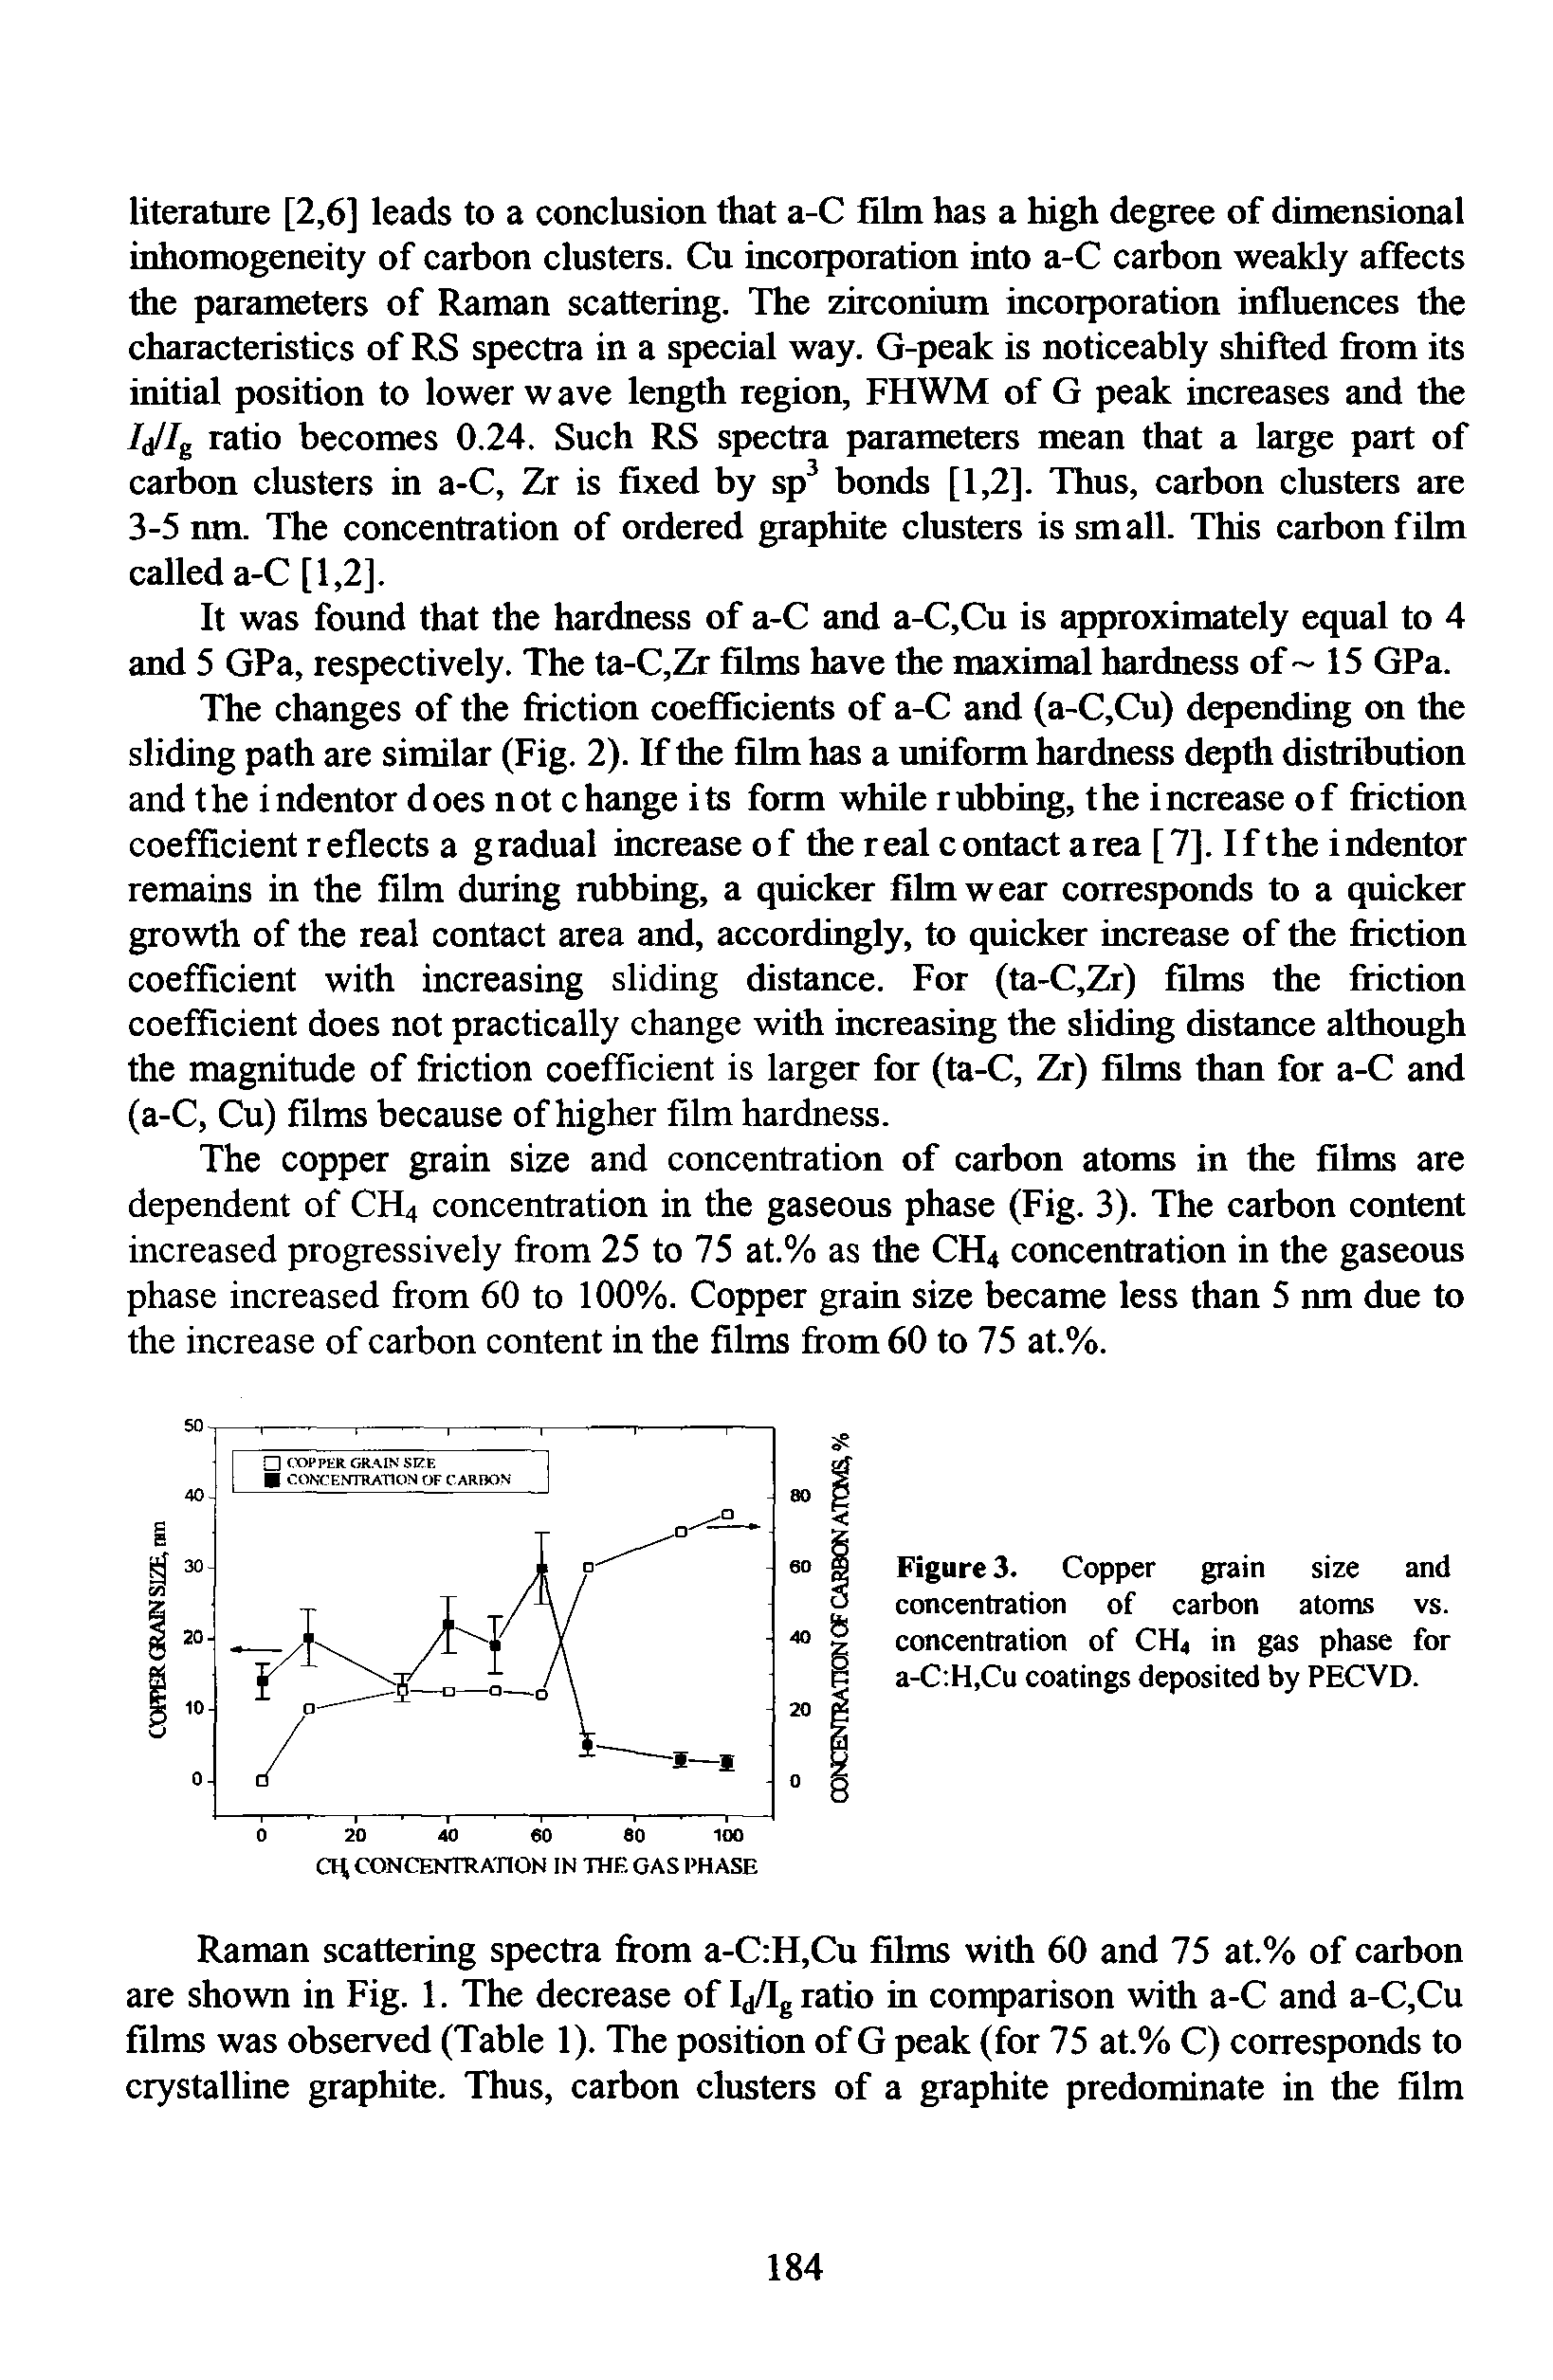 Figure 3. Copper grain size and concentration of carbon atoms vs. concentration of CH4 in gas phase for a-C H,Cu coatings deposited by PECVD.